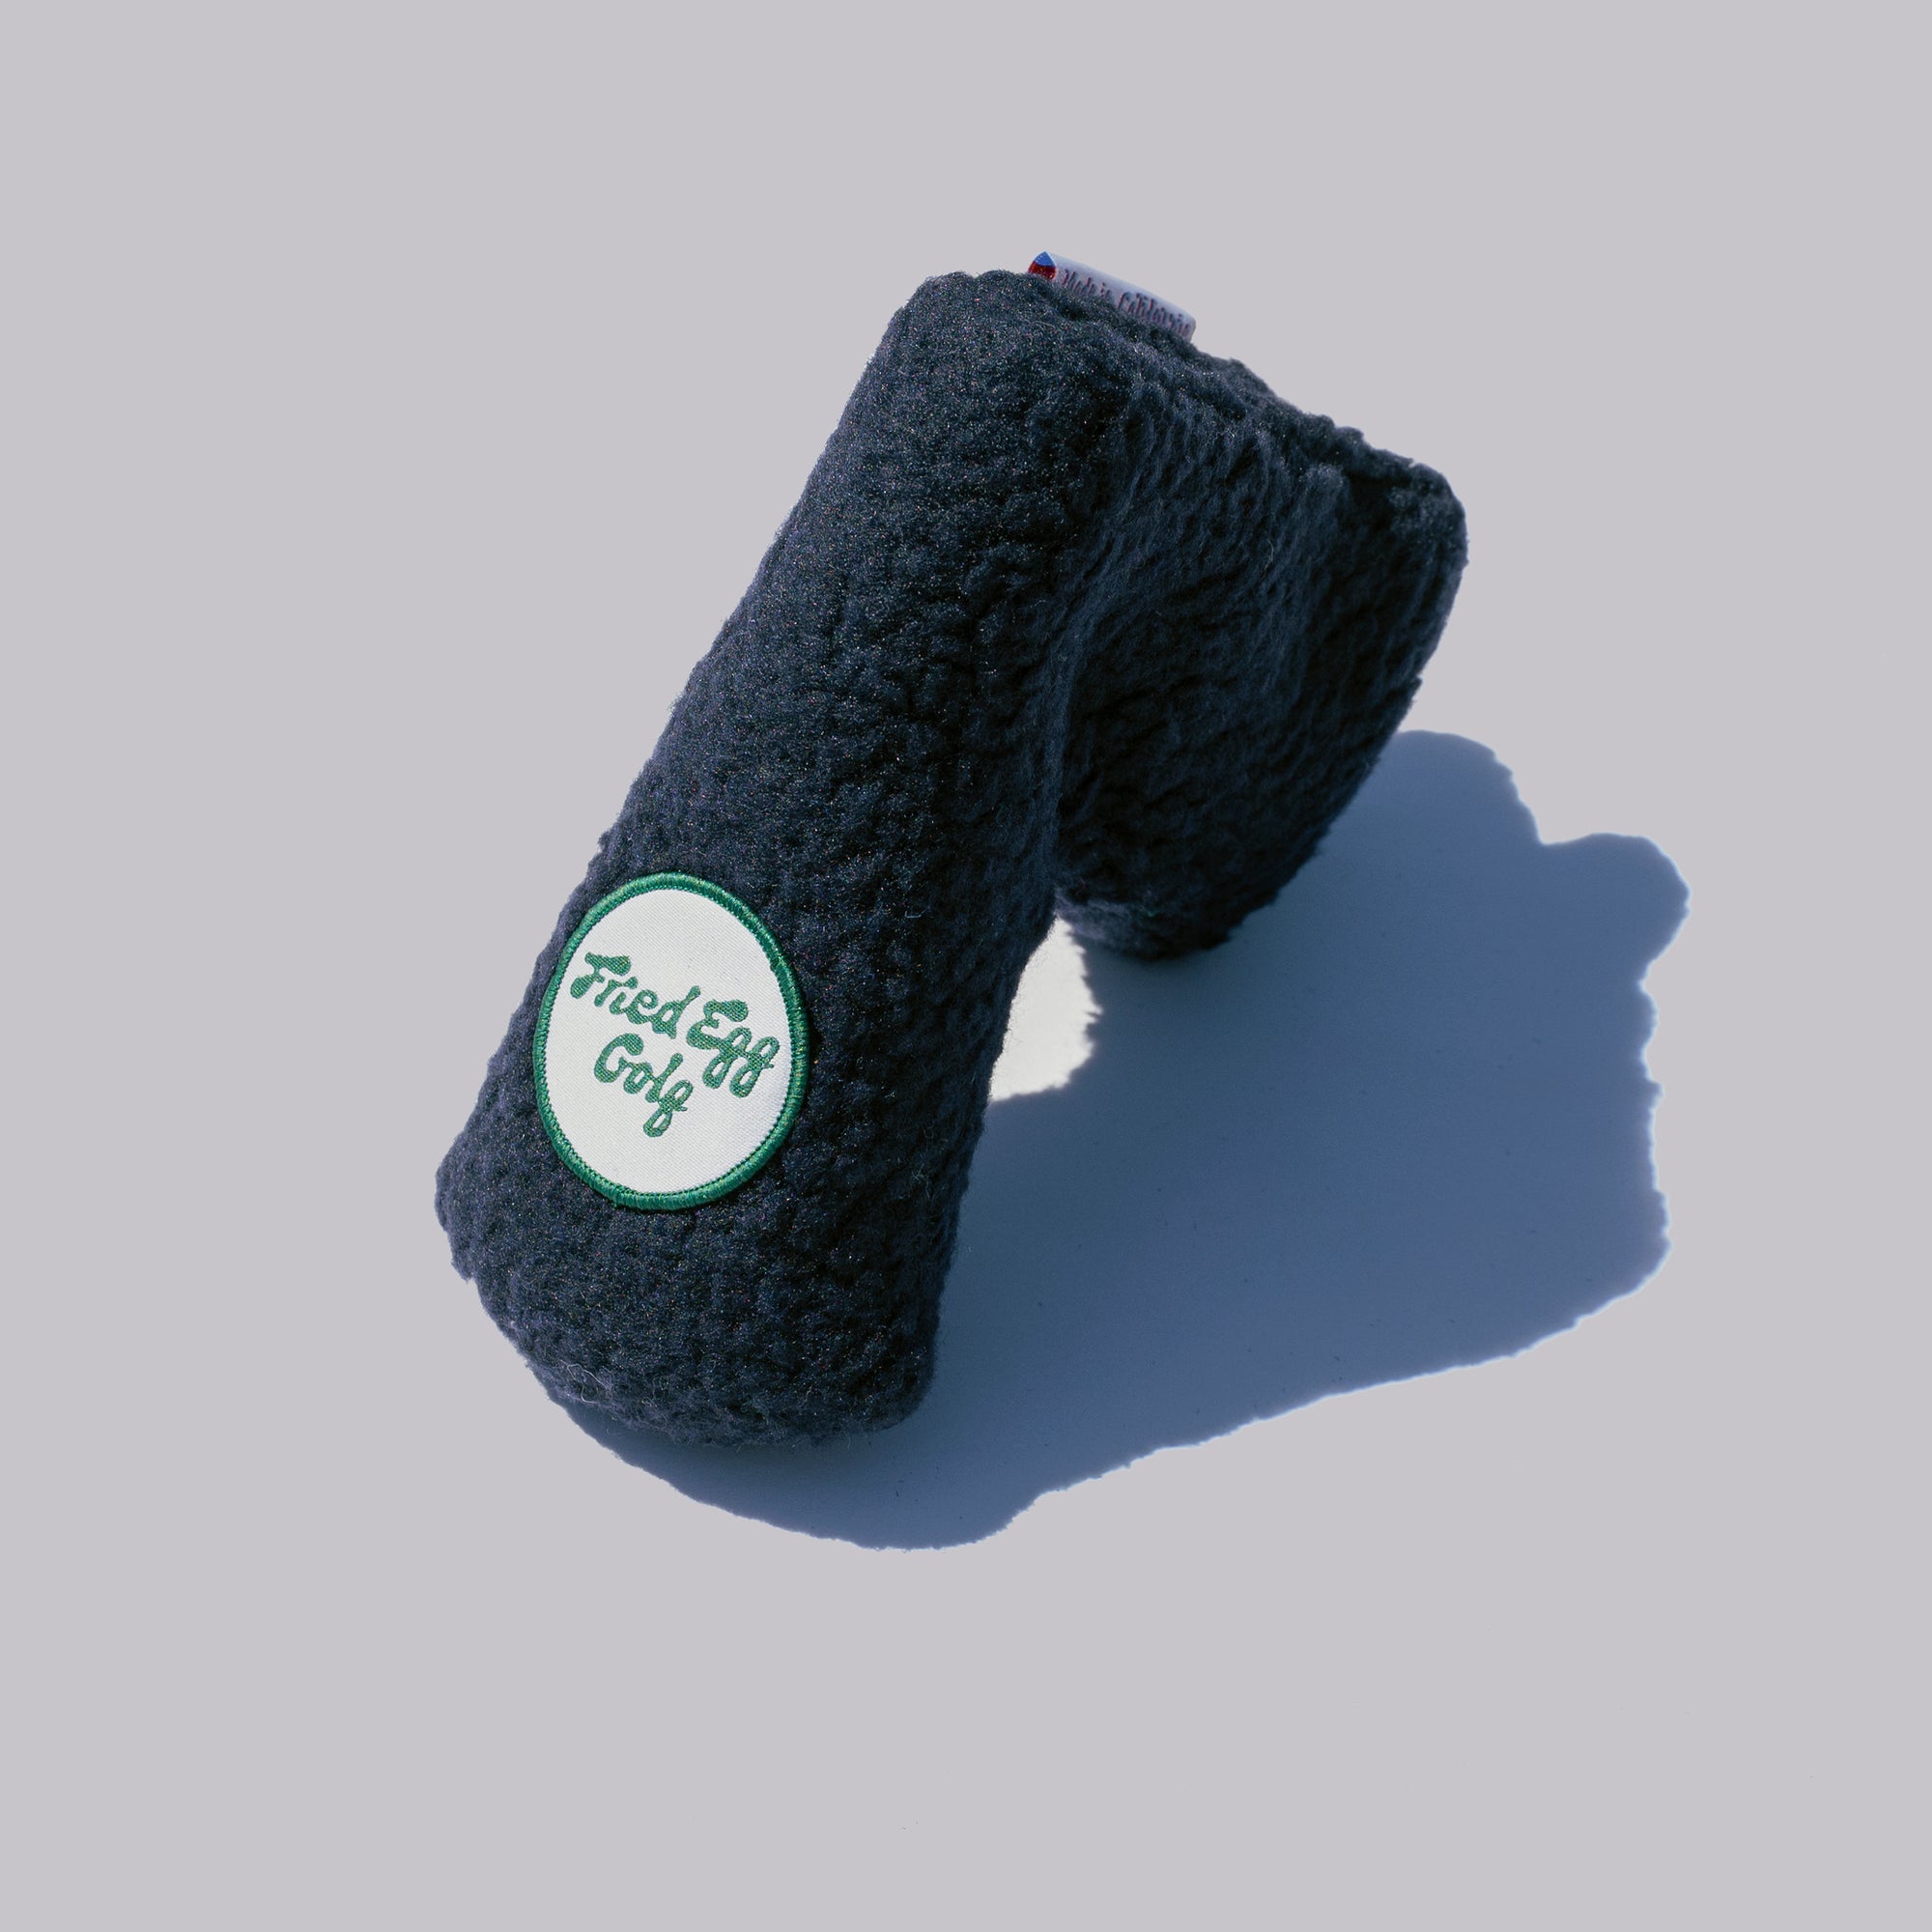 Fried Egg Golf Navy Sherpa Putter Cover